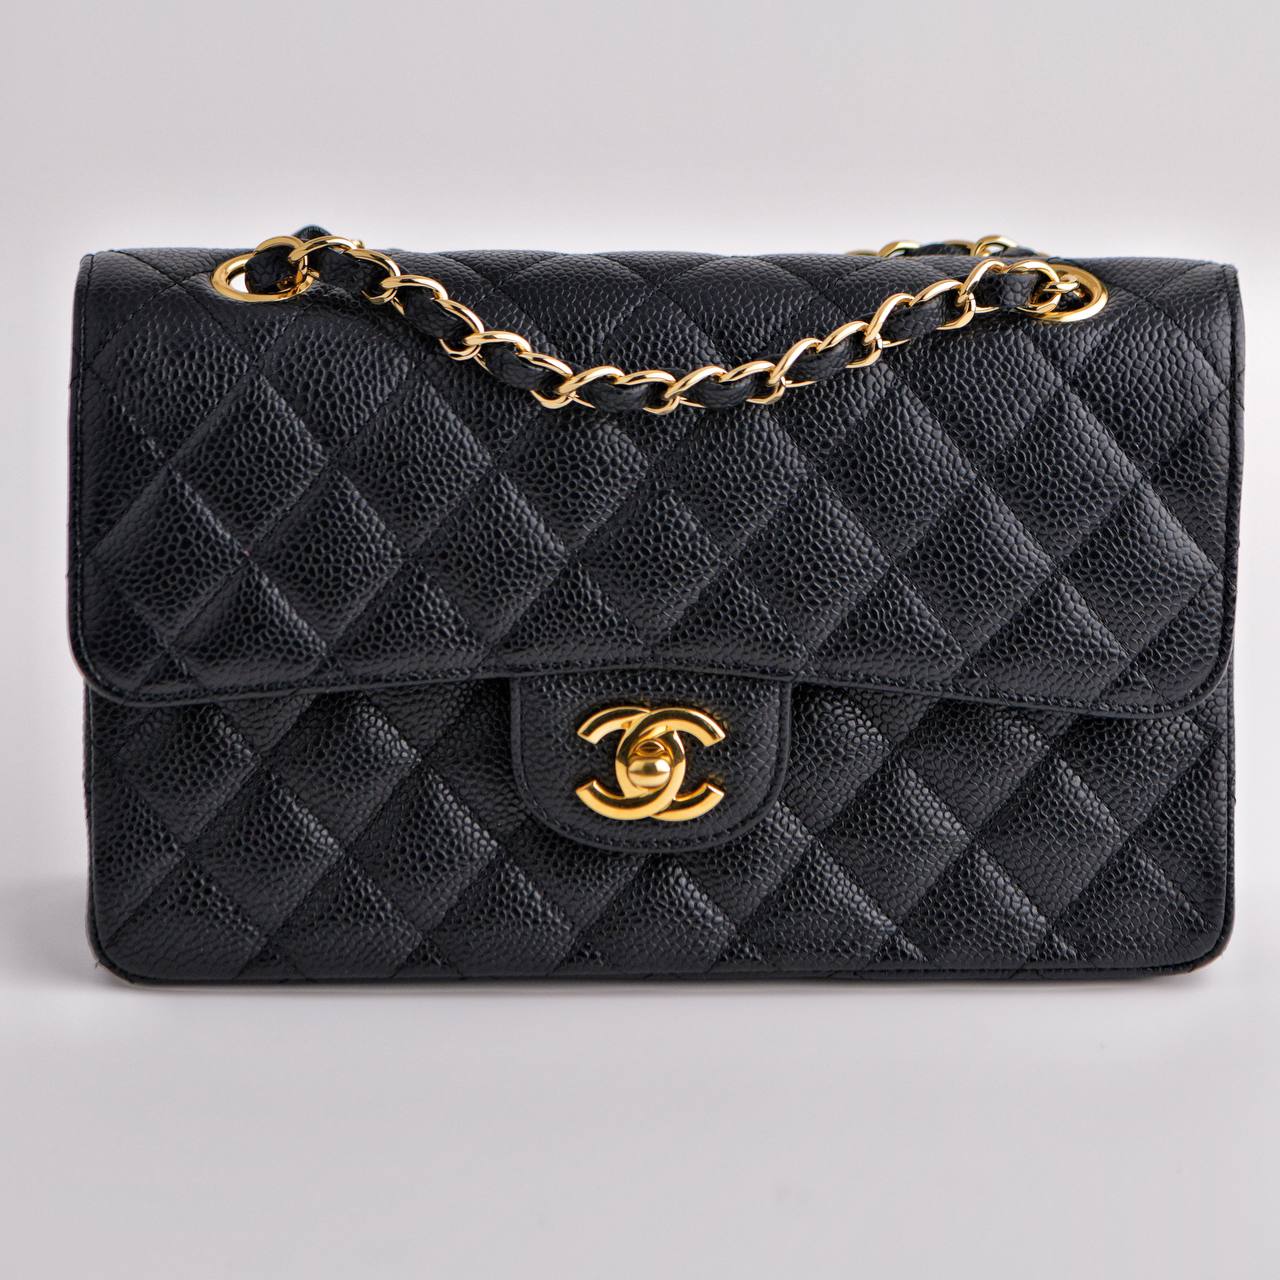 CHANEL Classic Flap Bags & Handbags for Women for sale